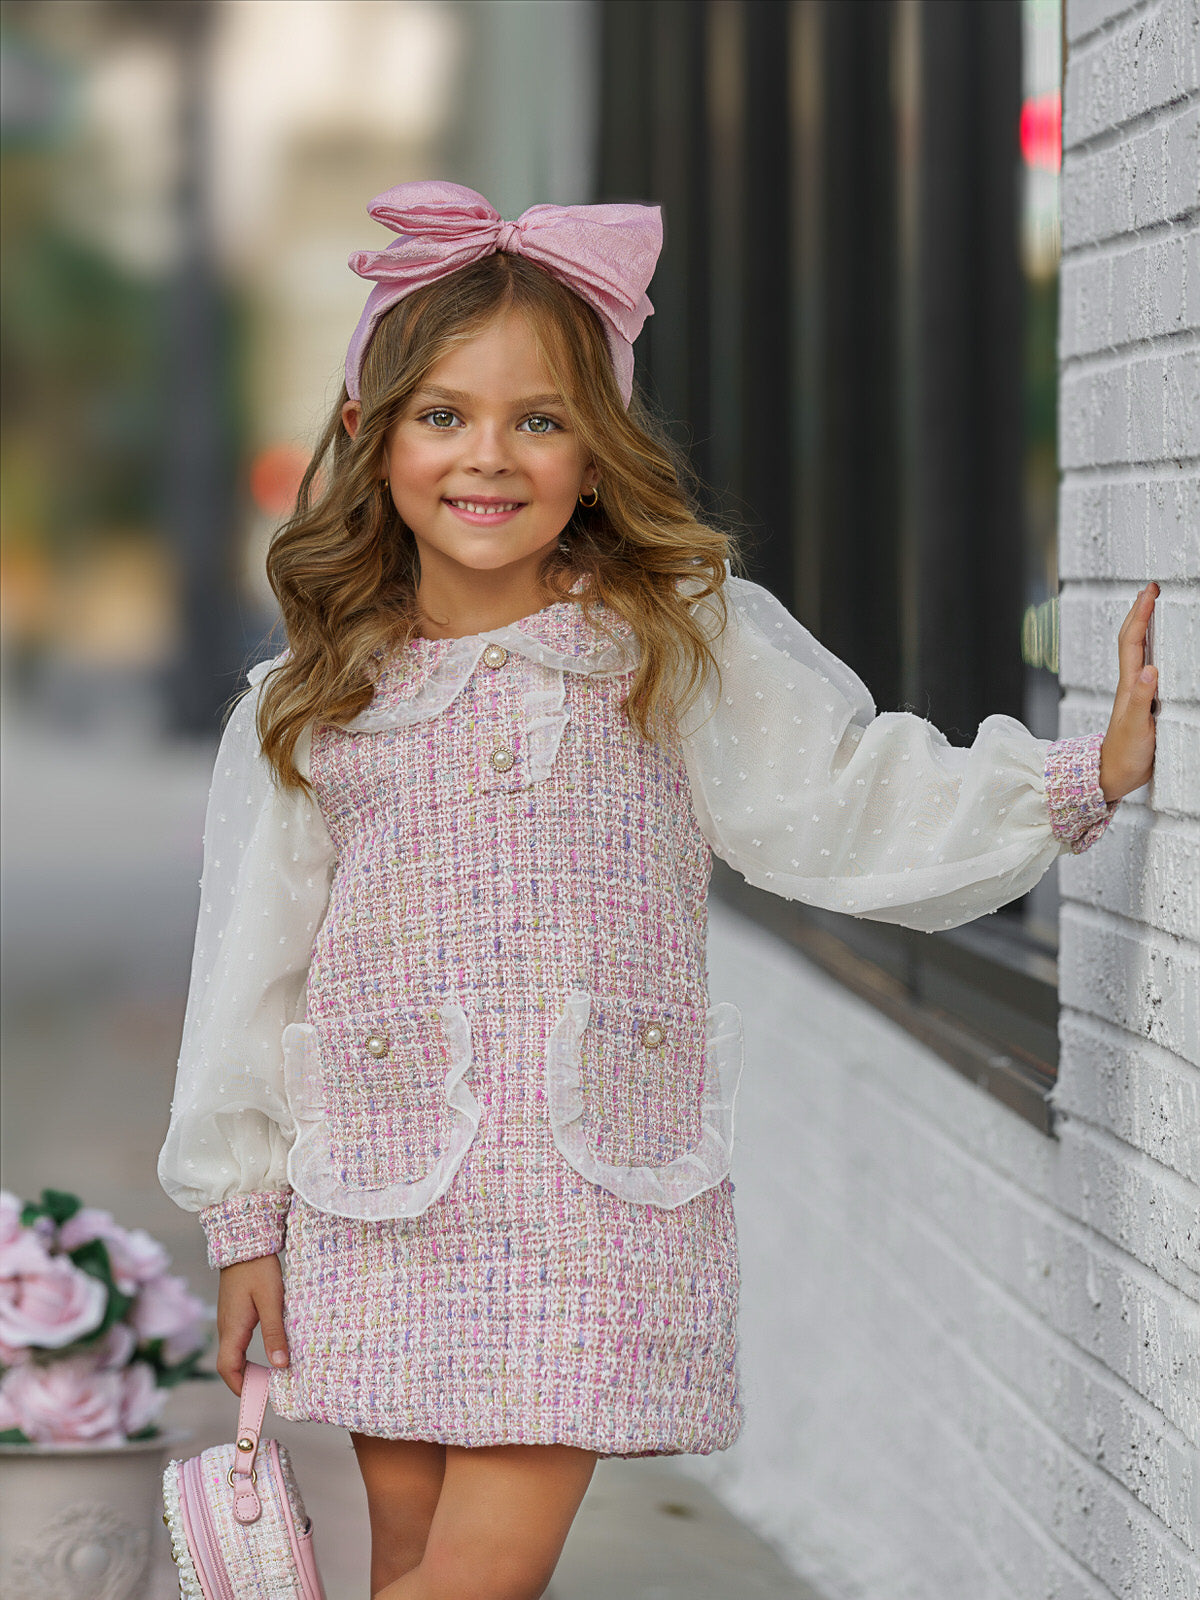 Shipping Revolution Overseas Fulfillment So Delicate Pink Tweed Dress Pink / 4T